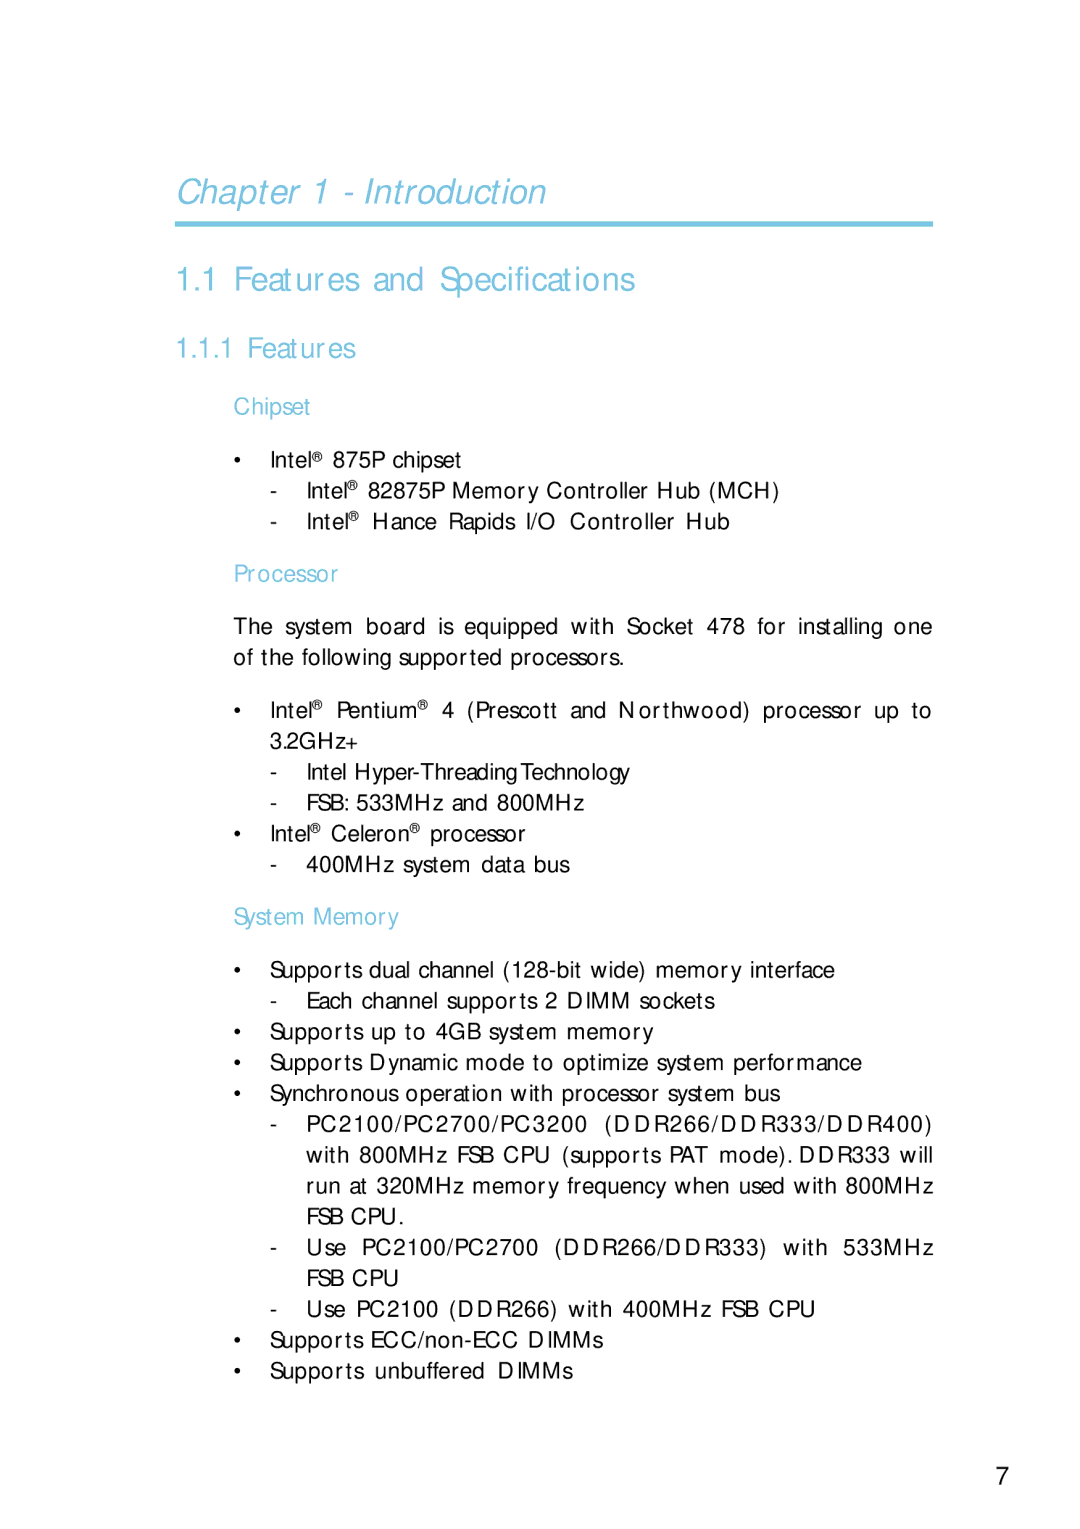 Intel G4H875-N, G4H875-B, G4H875-C user manual Features and Specifications, Chipset, Processor, System Memory 